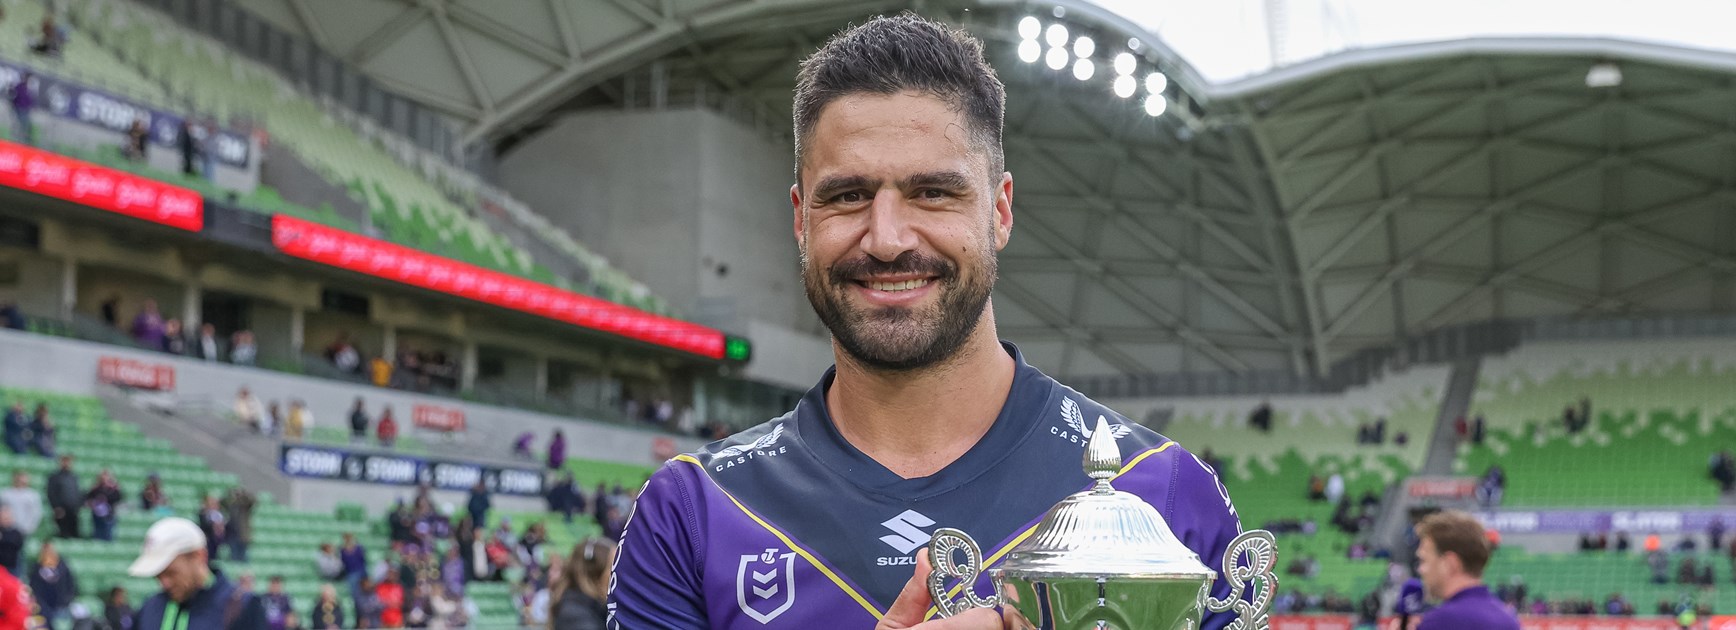 Storm, Dragons face for Emergency Services Cup